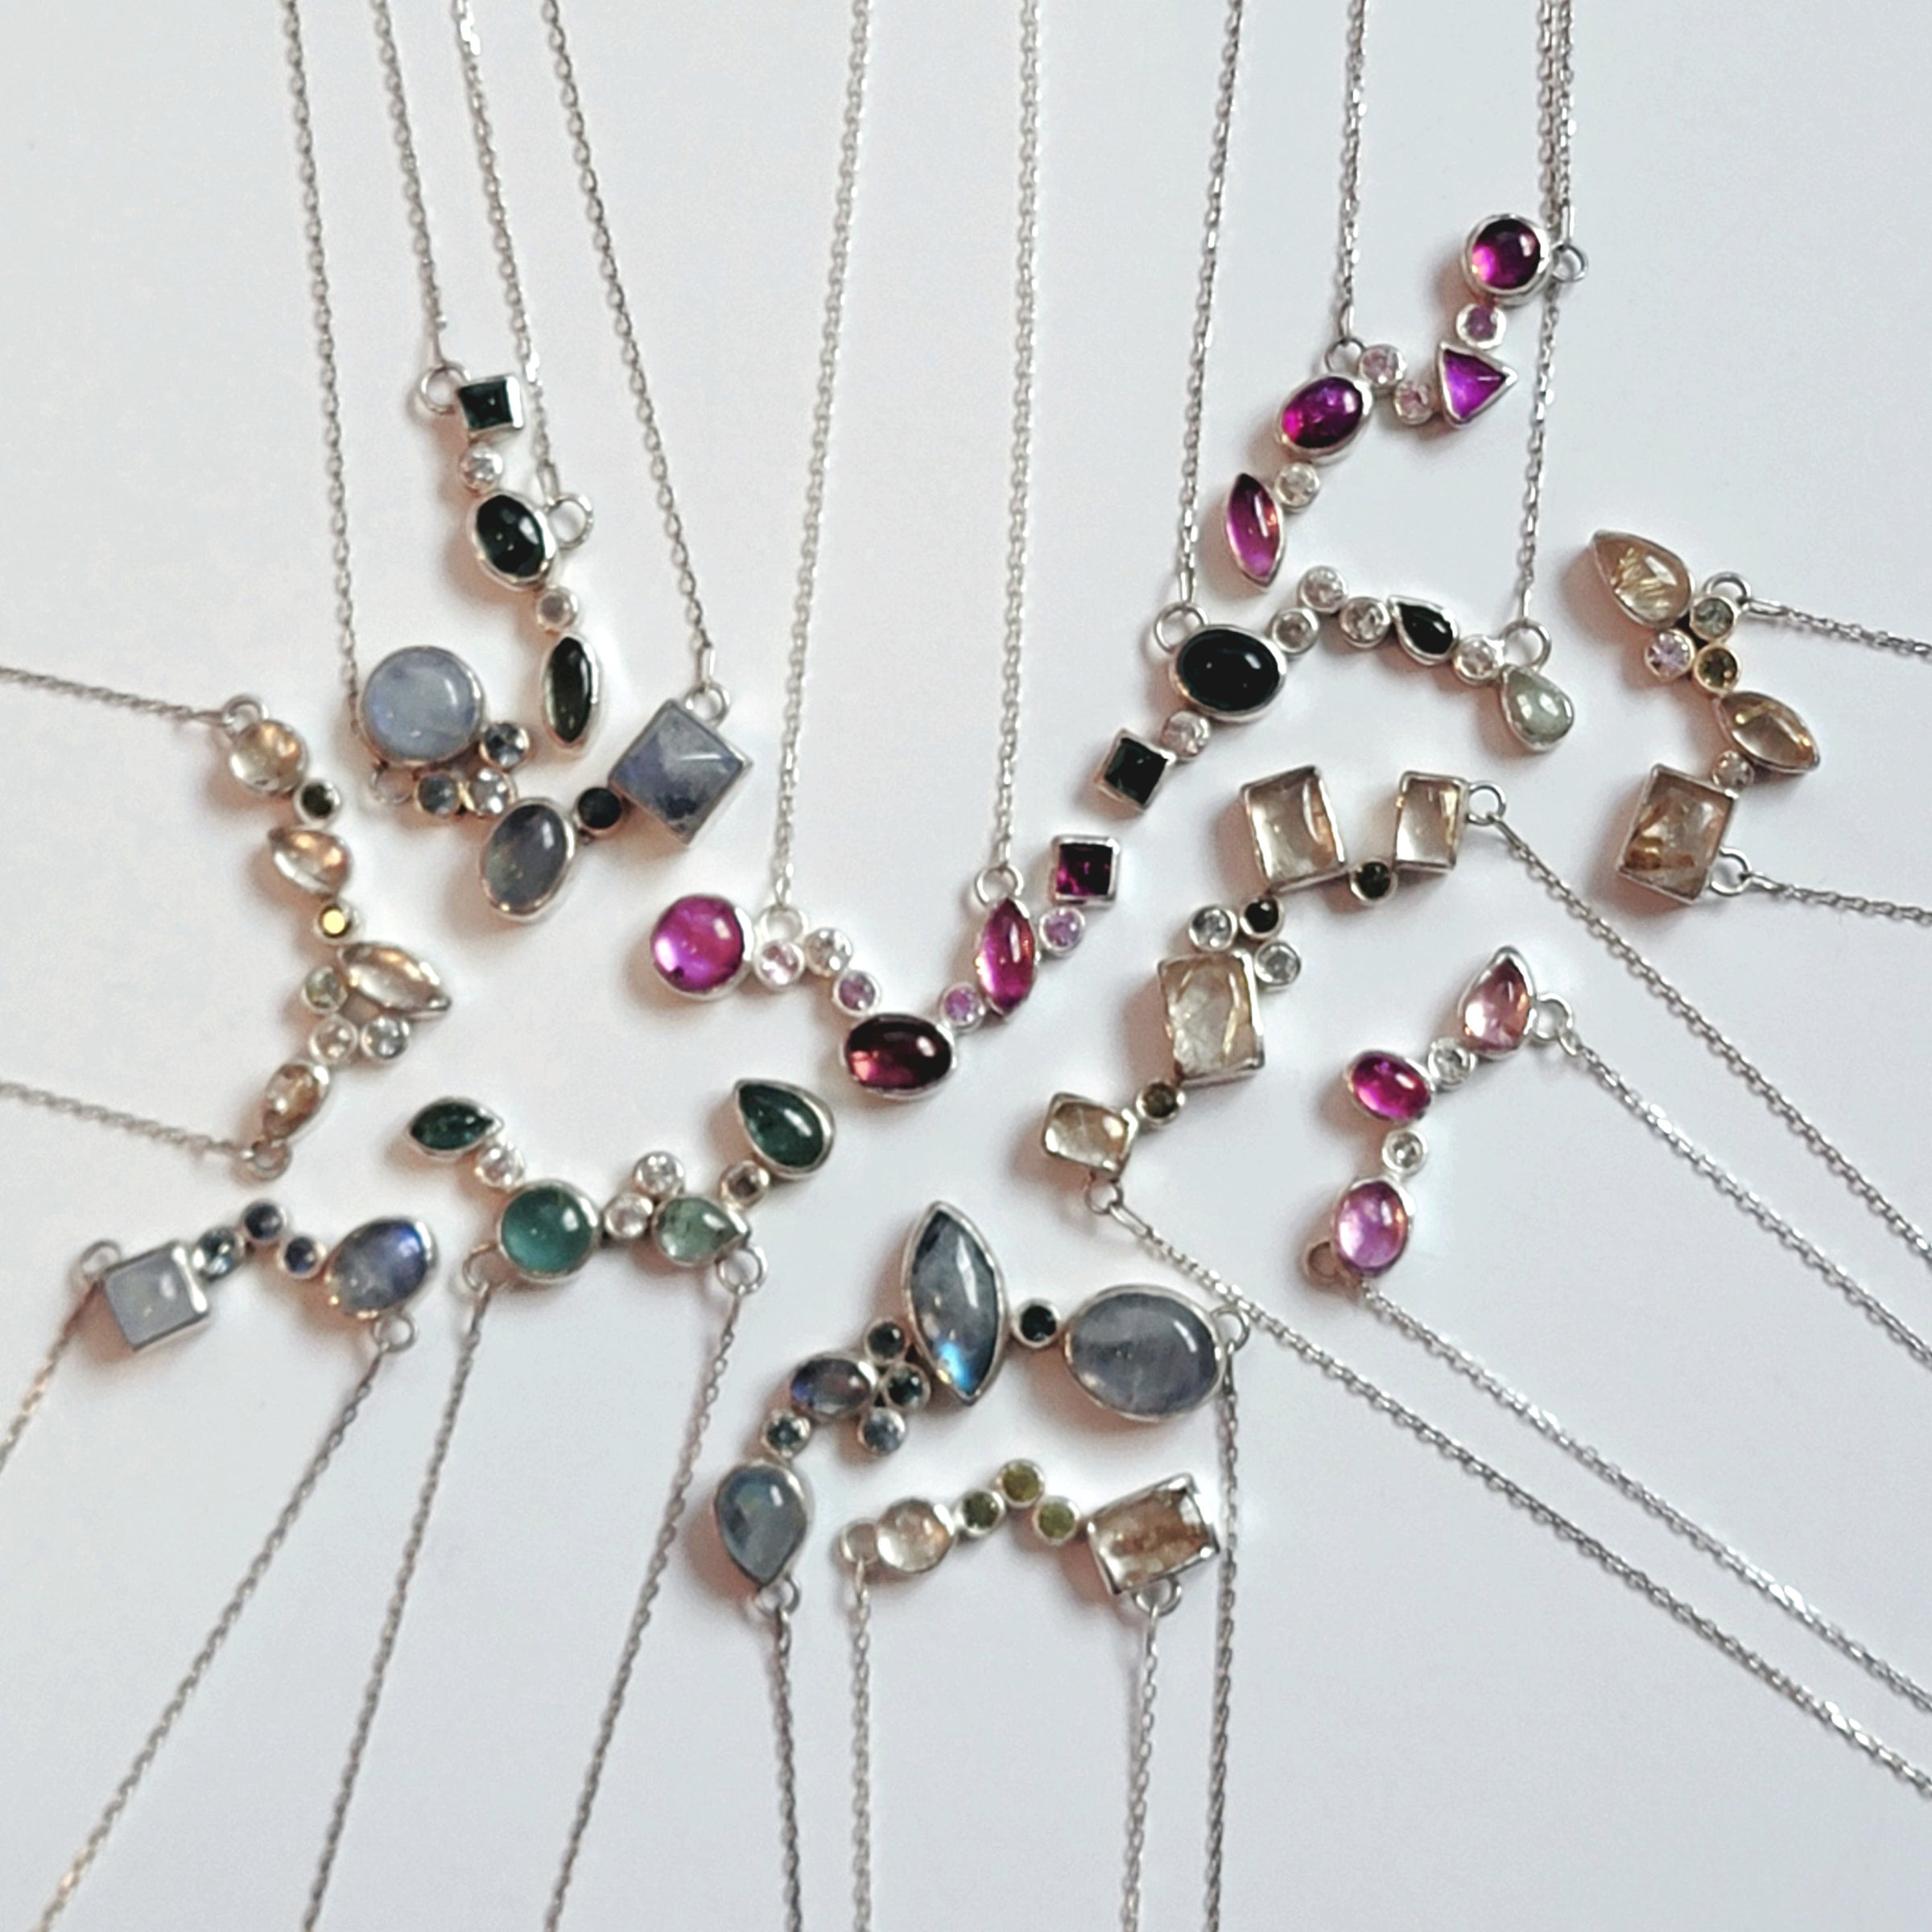 the 13 necklaces that make up the Starry Night Collection laid out on a white background to mimic a night sky